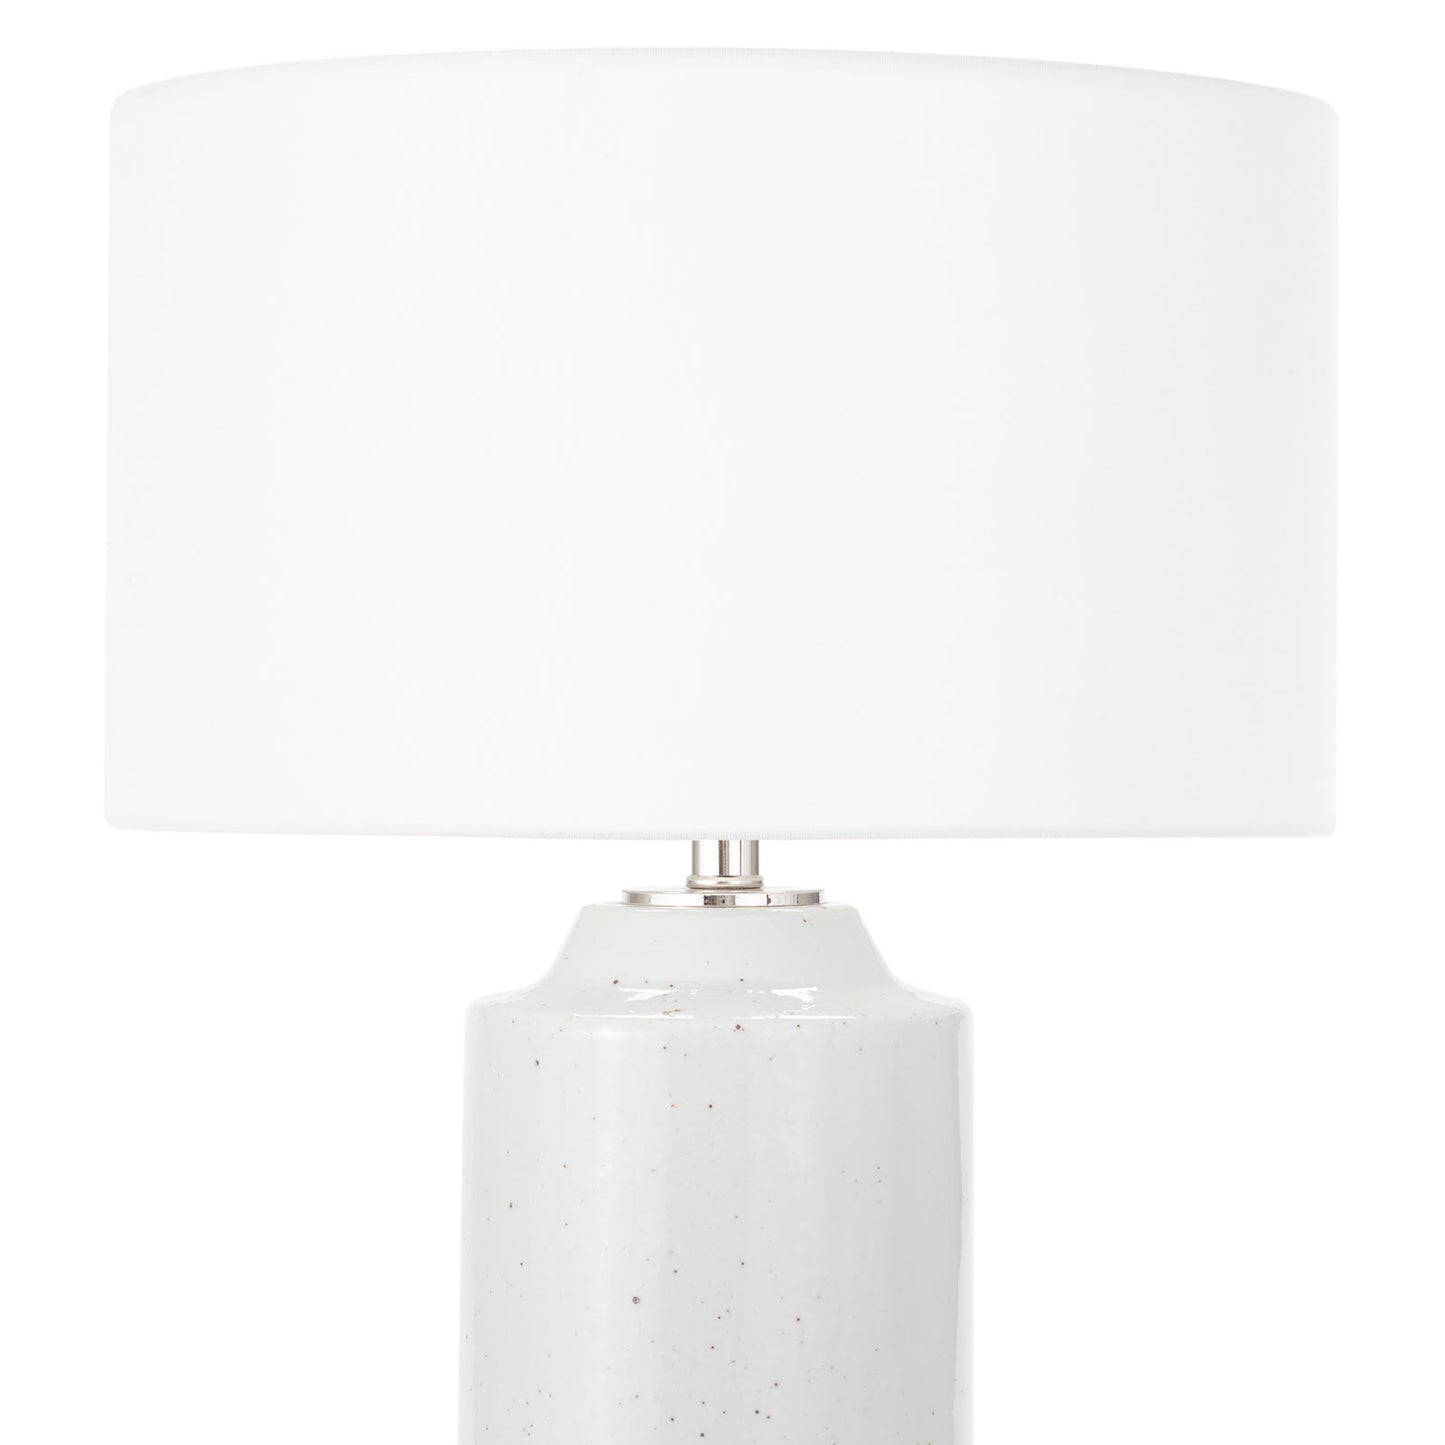 Markus Ceramic Table Lamp by Southern Living